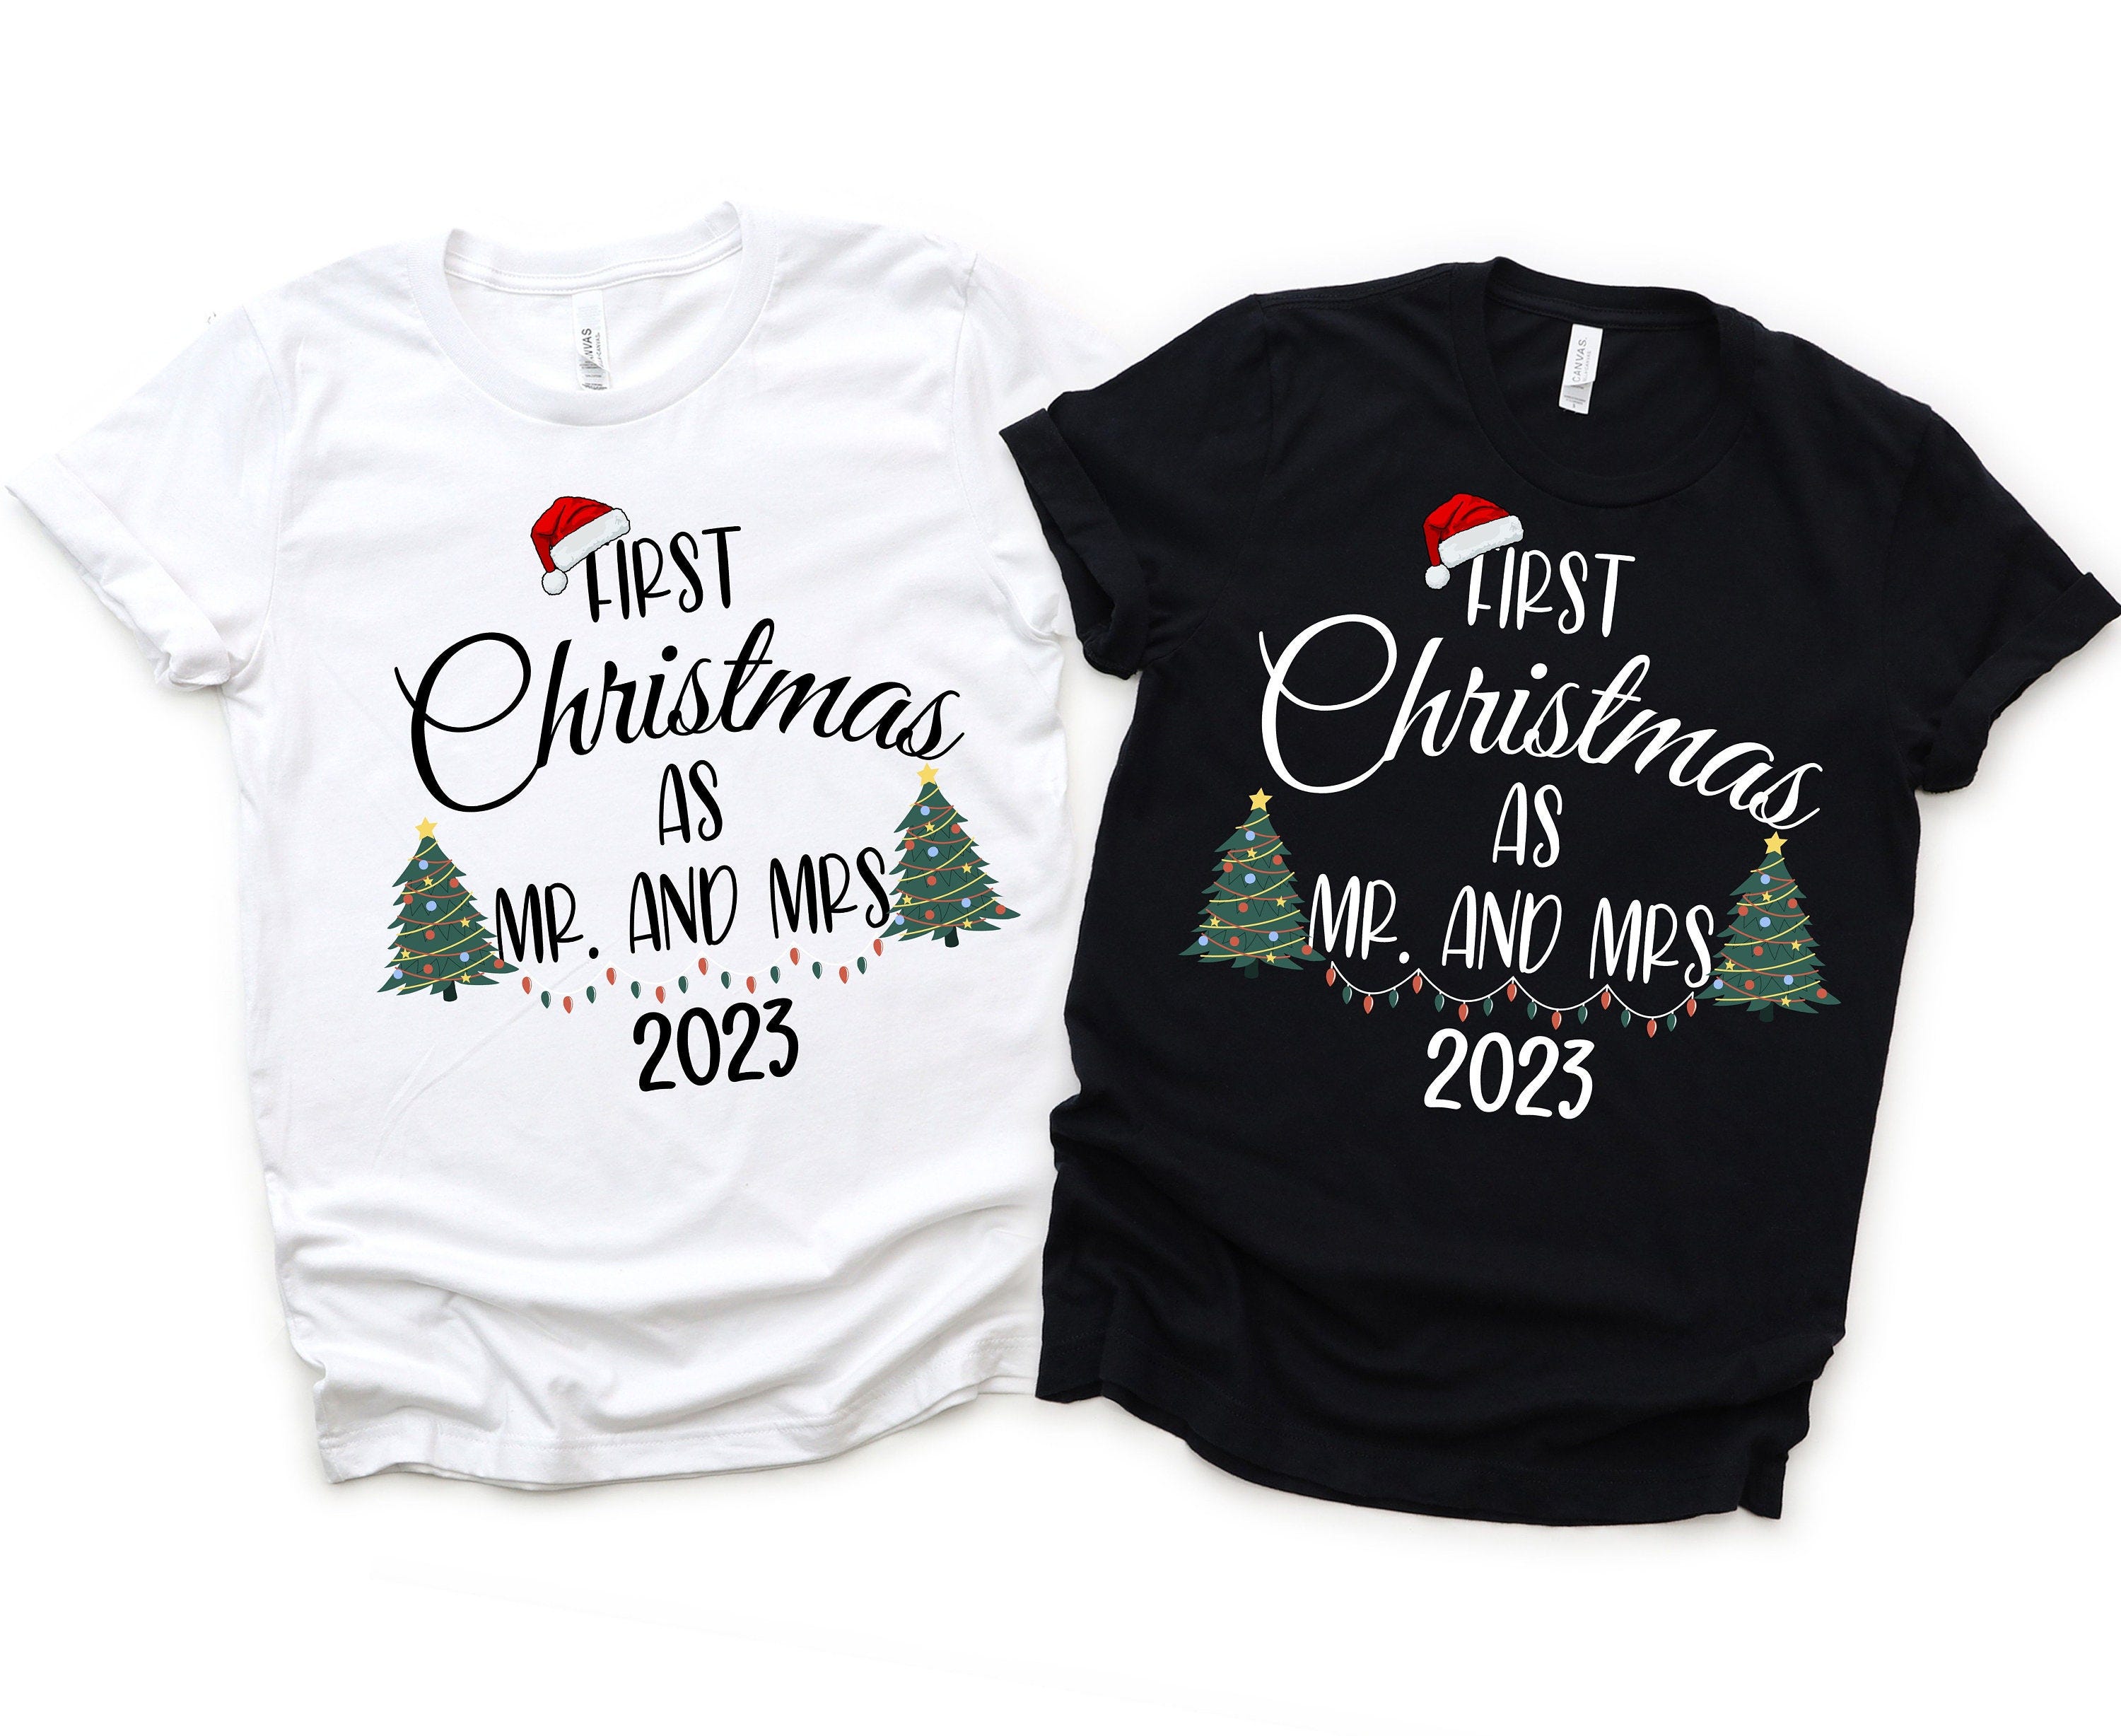 First Christmas As Mr And Mrs 2023 PNG Bundle, Matching Holiday Couples Gift, His and Hers, Christmas Party, Newlyweds, DIY Christmas Shirt